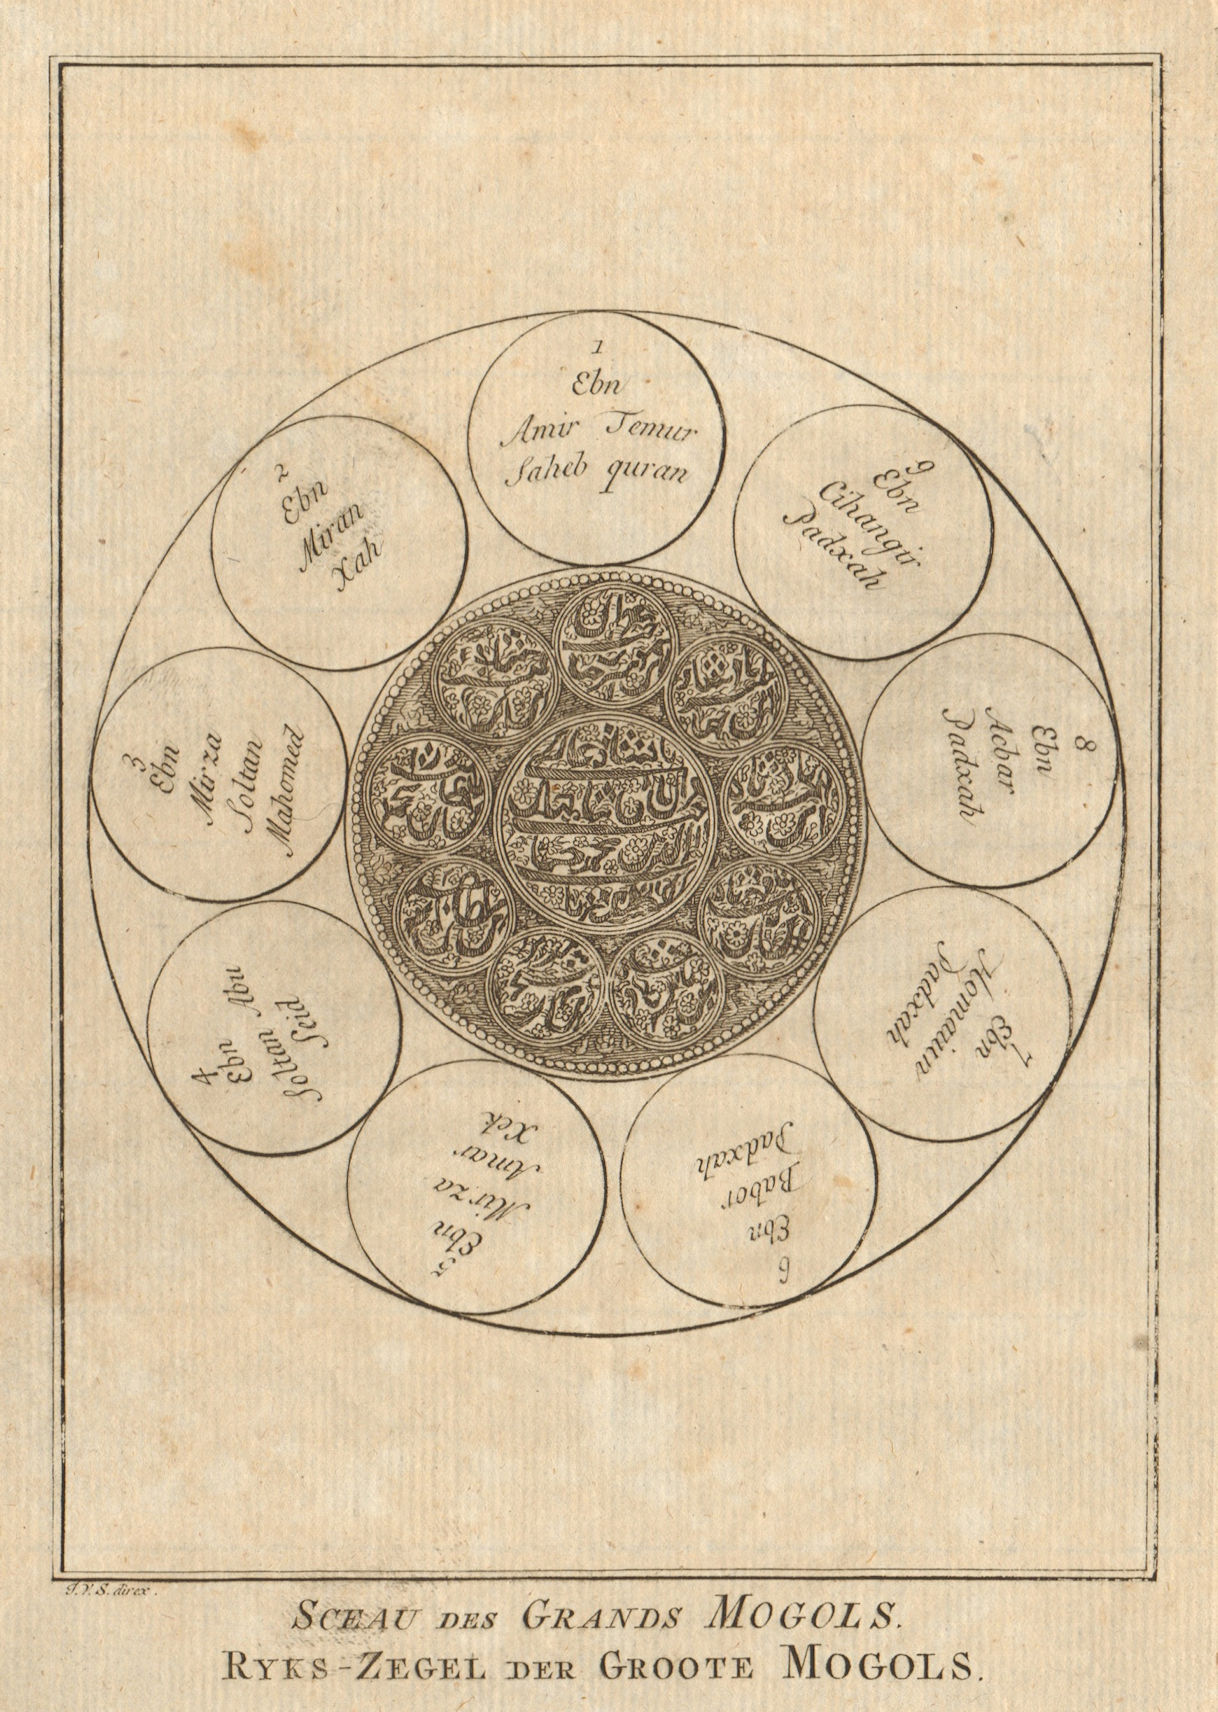 'Sceau des Grands Mogols'. India. Seal of the Mughal Emperors. SCHLEY 1755